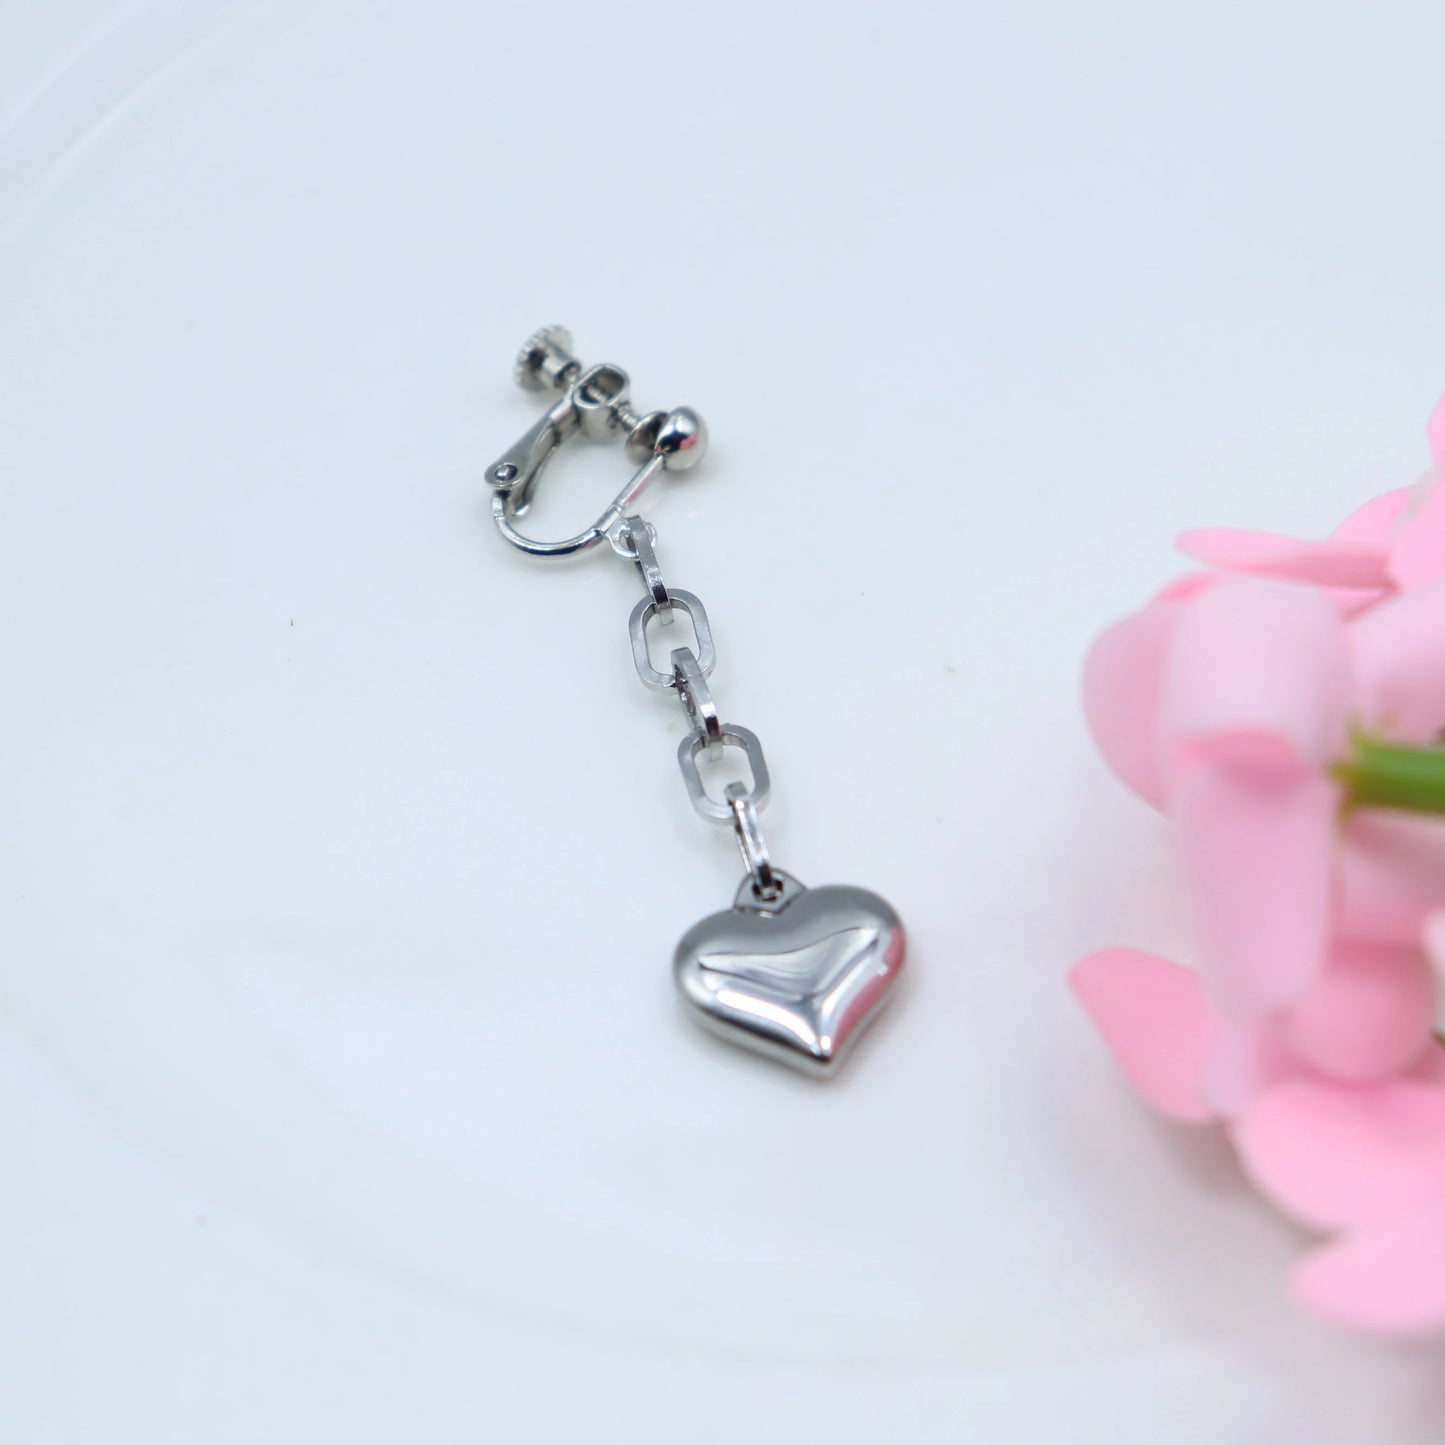 Sinister Chic: Death Note Ryuuku Heart Earrings – Edgy Anime-Inspired Ear Clips